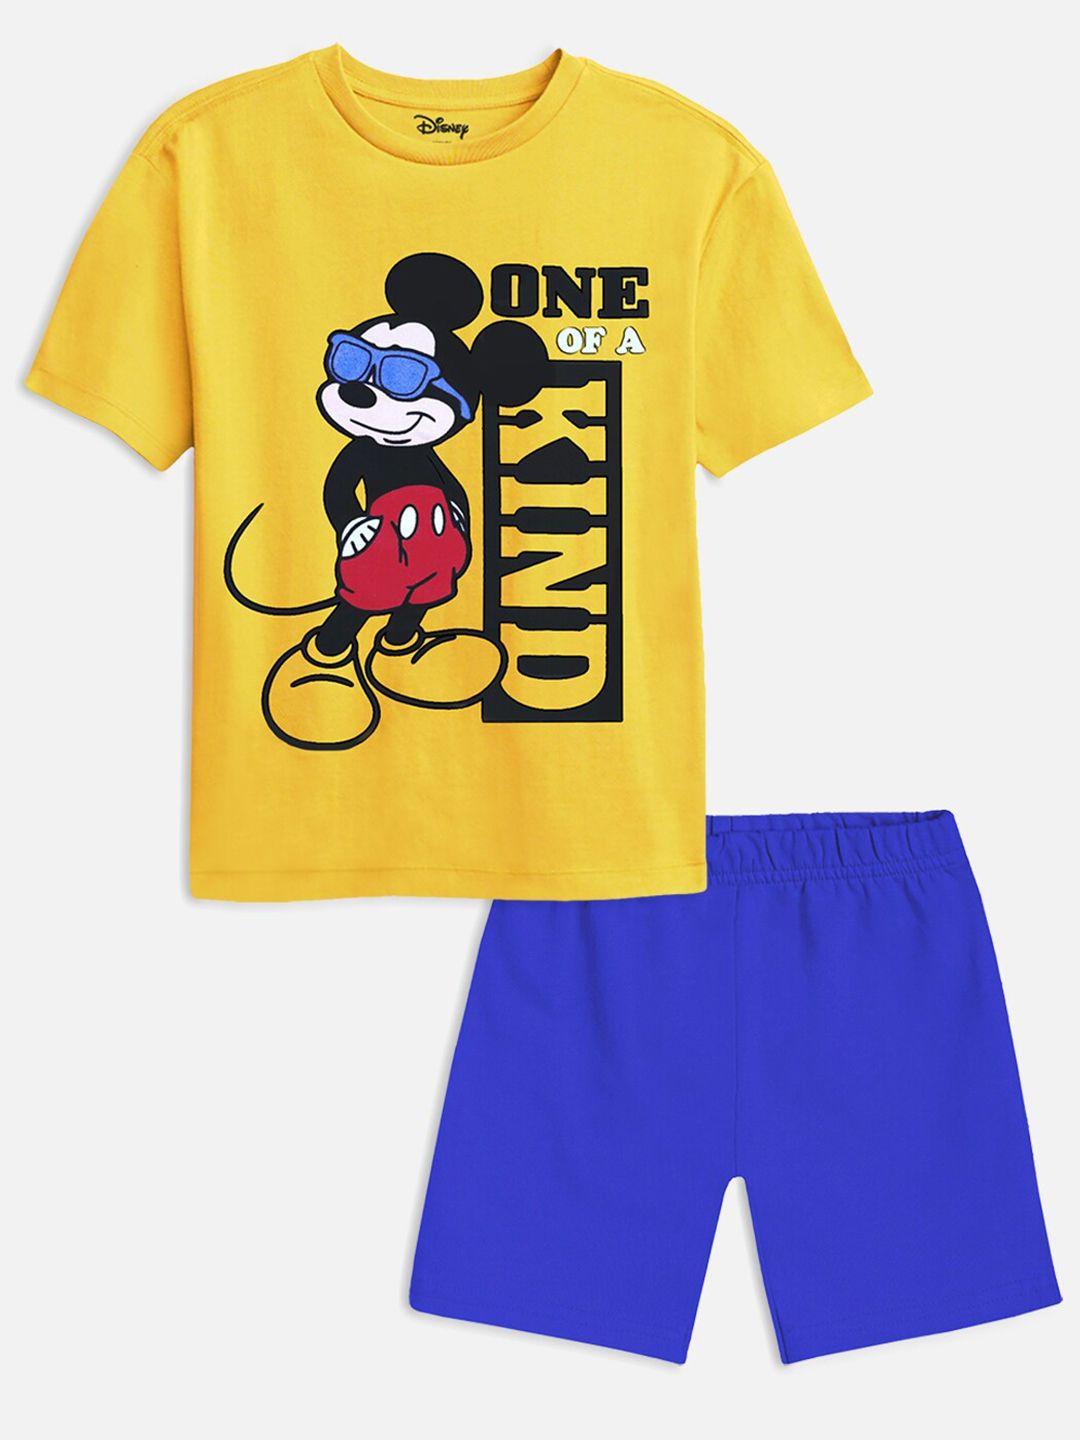 yk disney kids yellow & blue mickey mouse printed t-shirt with shorts